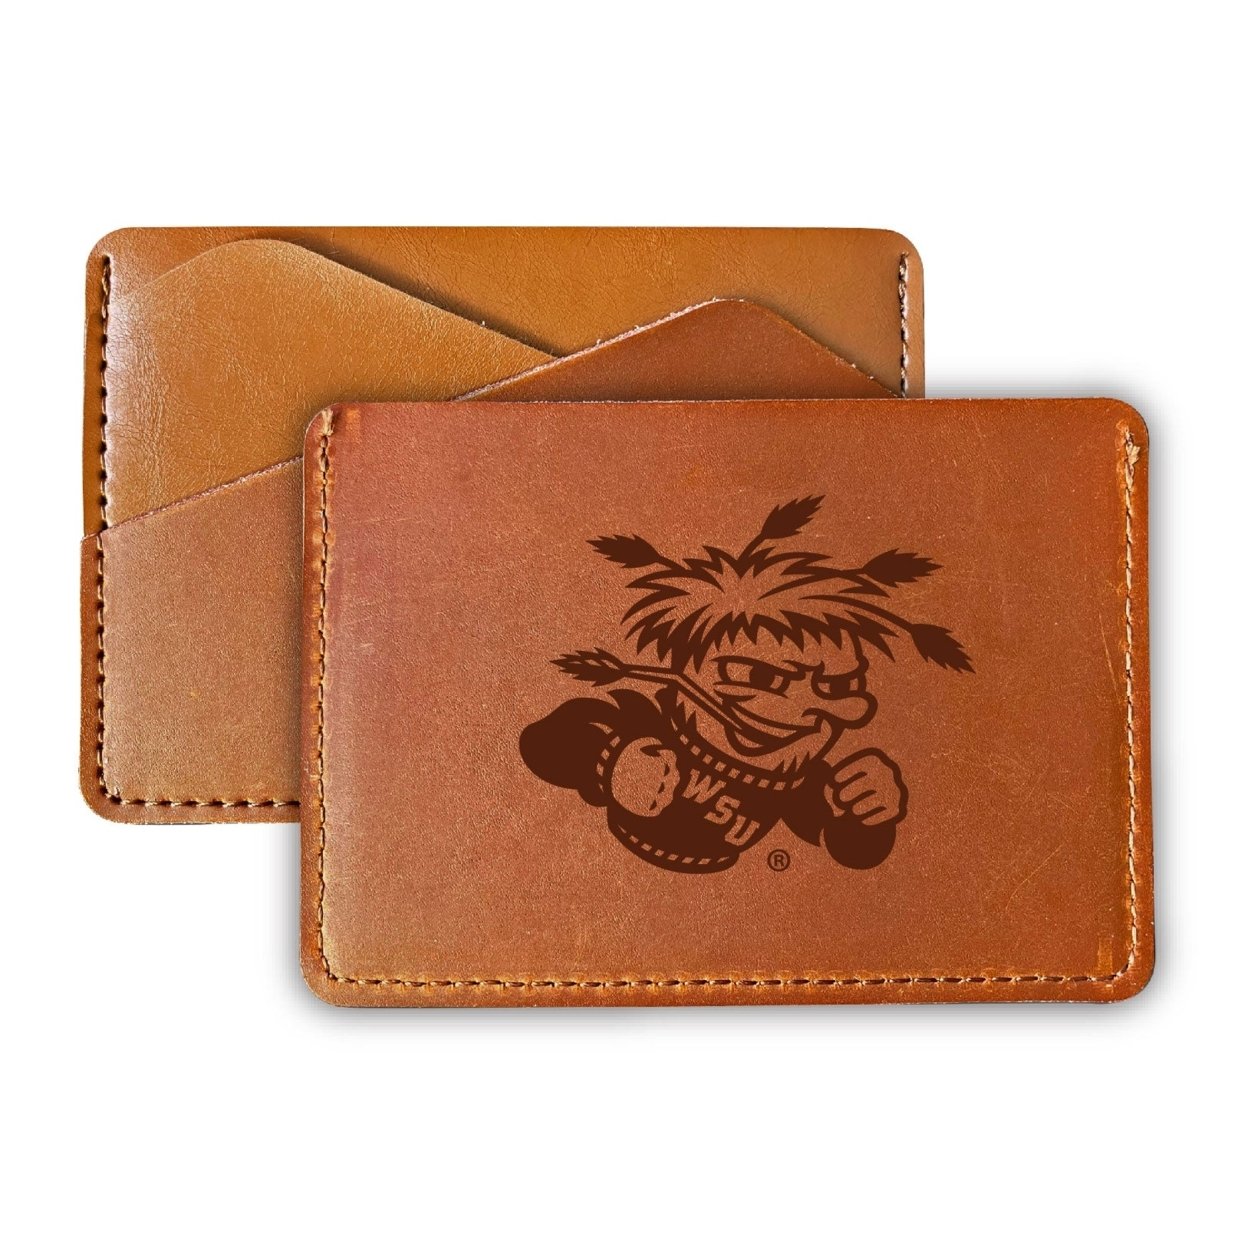 Wichita State Shockers College Leather Card Holder Wallet